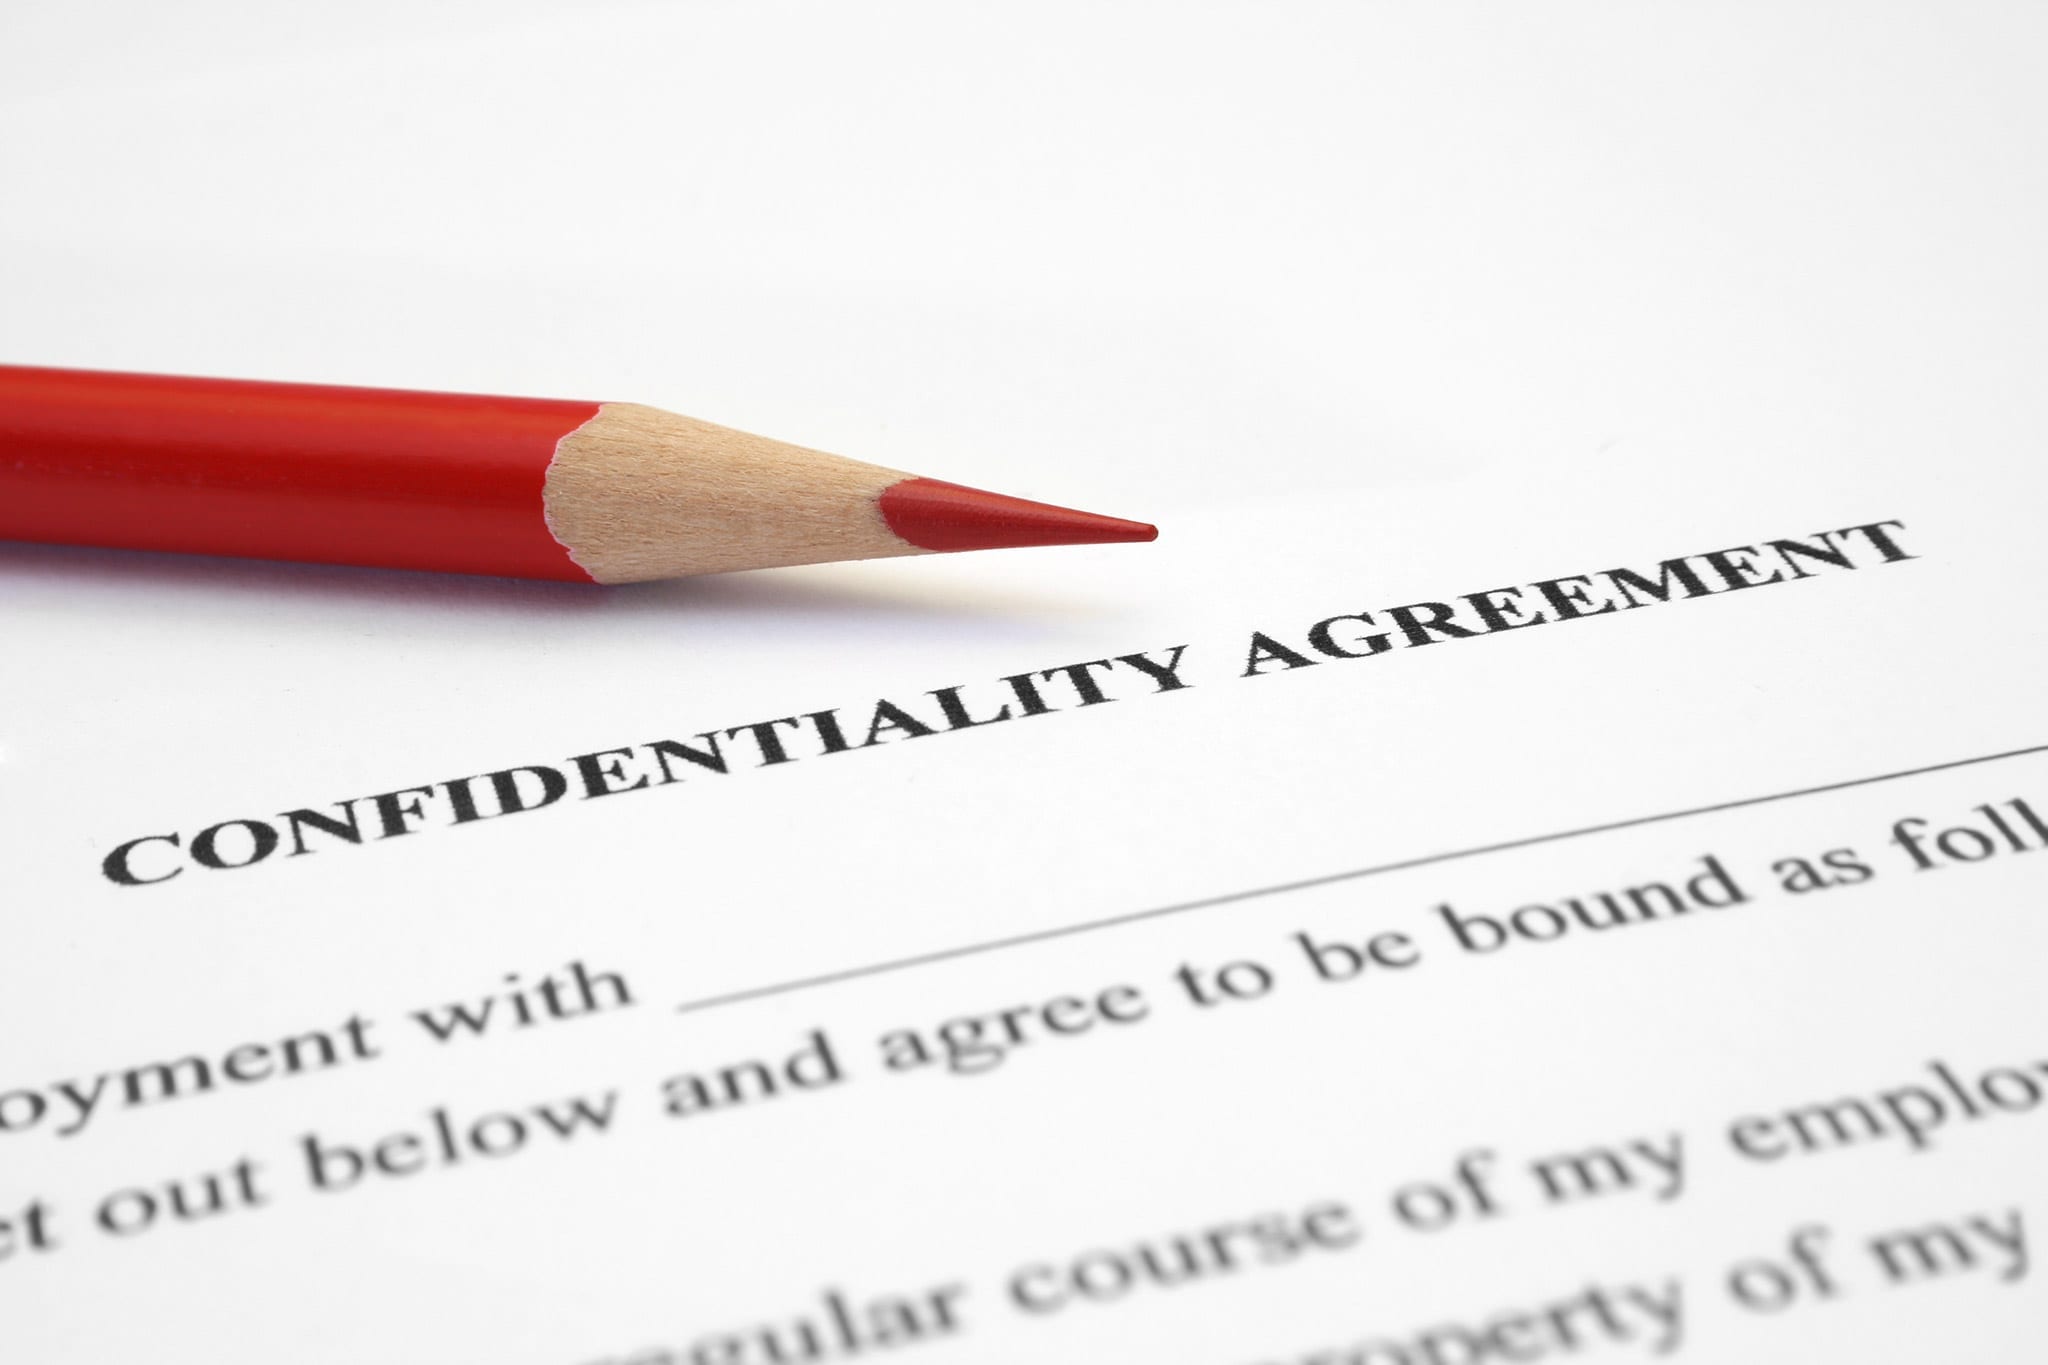 Confidentiality Agreement: What, Why, How? (2019)